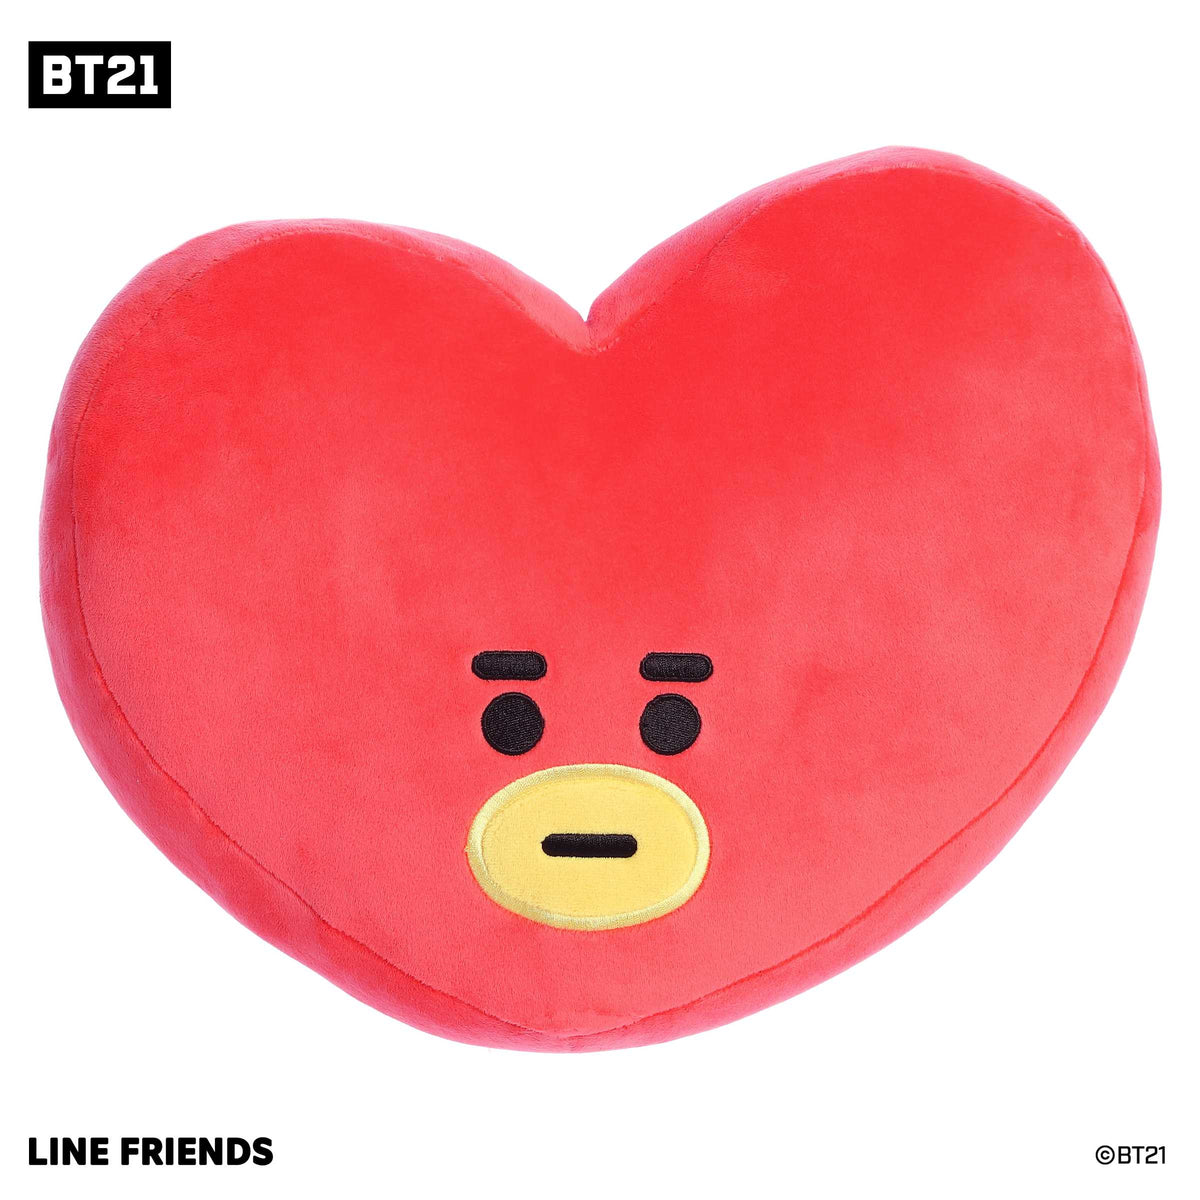 TATA Large Plush from BT21 in a heart-shape, symbolizing the crown prince from Planet BT with a confident expression.